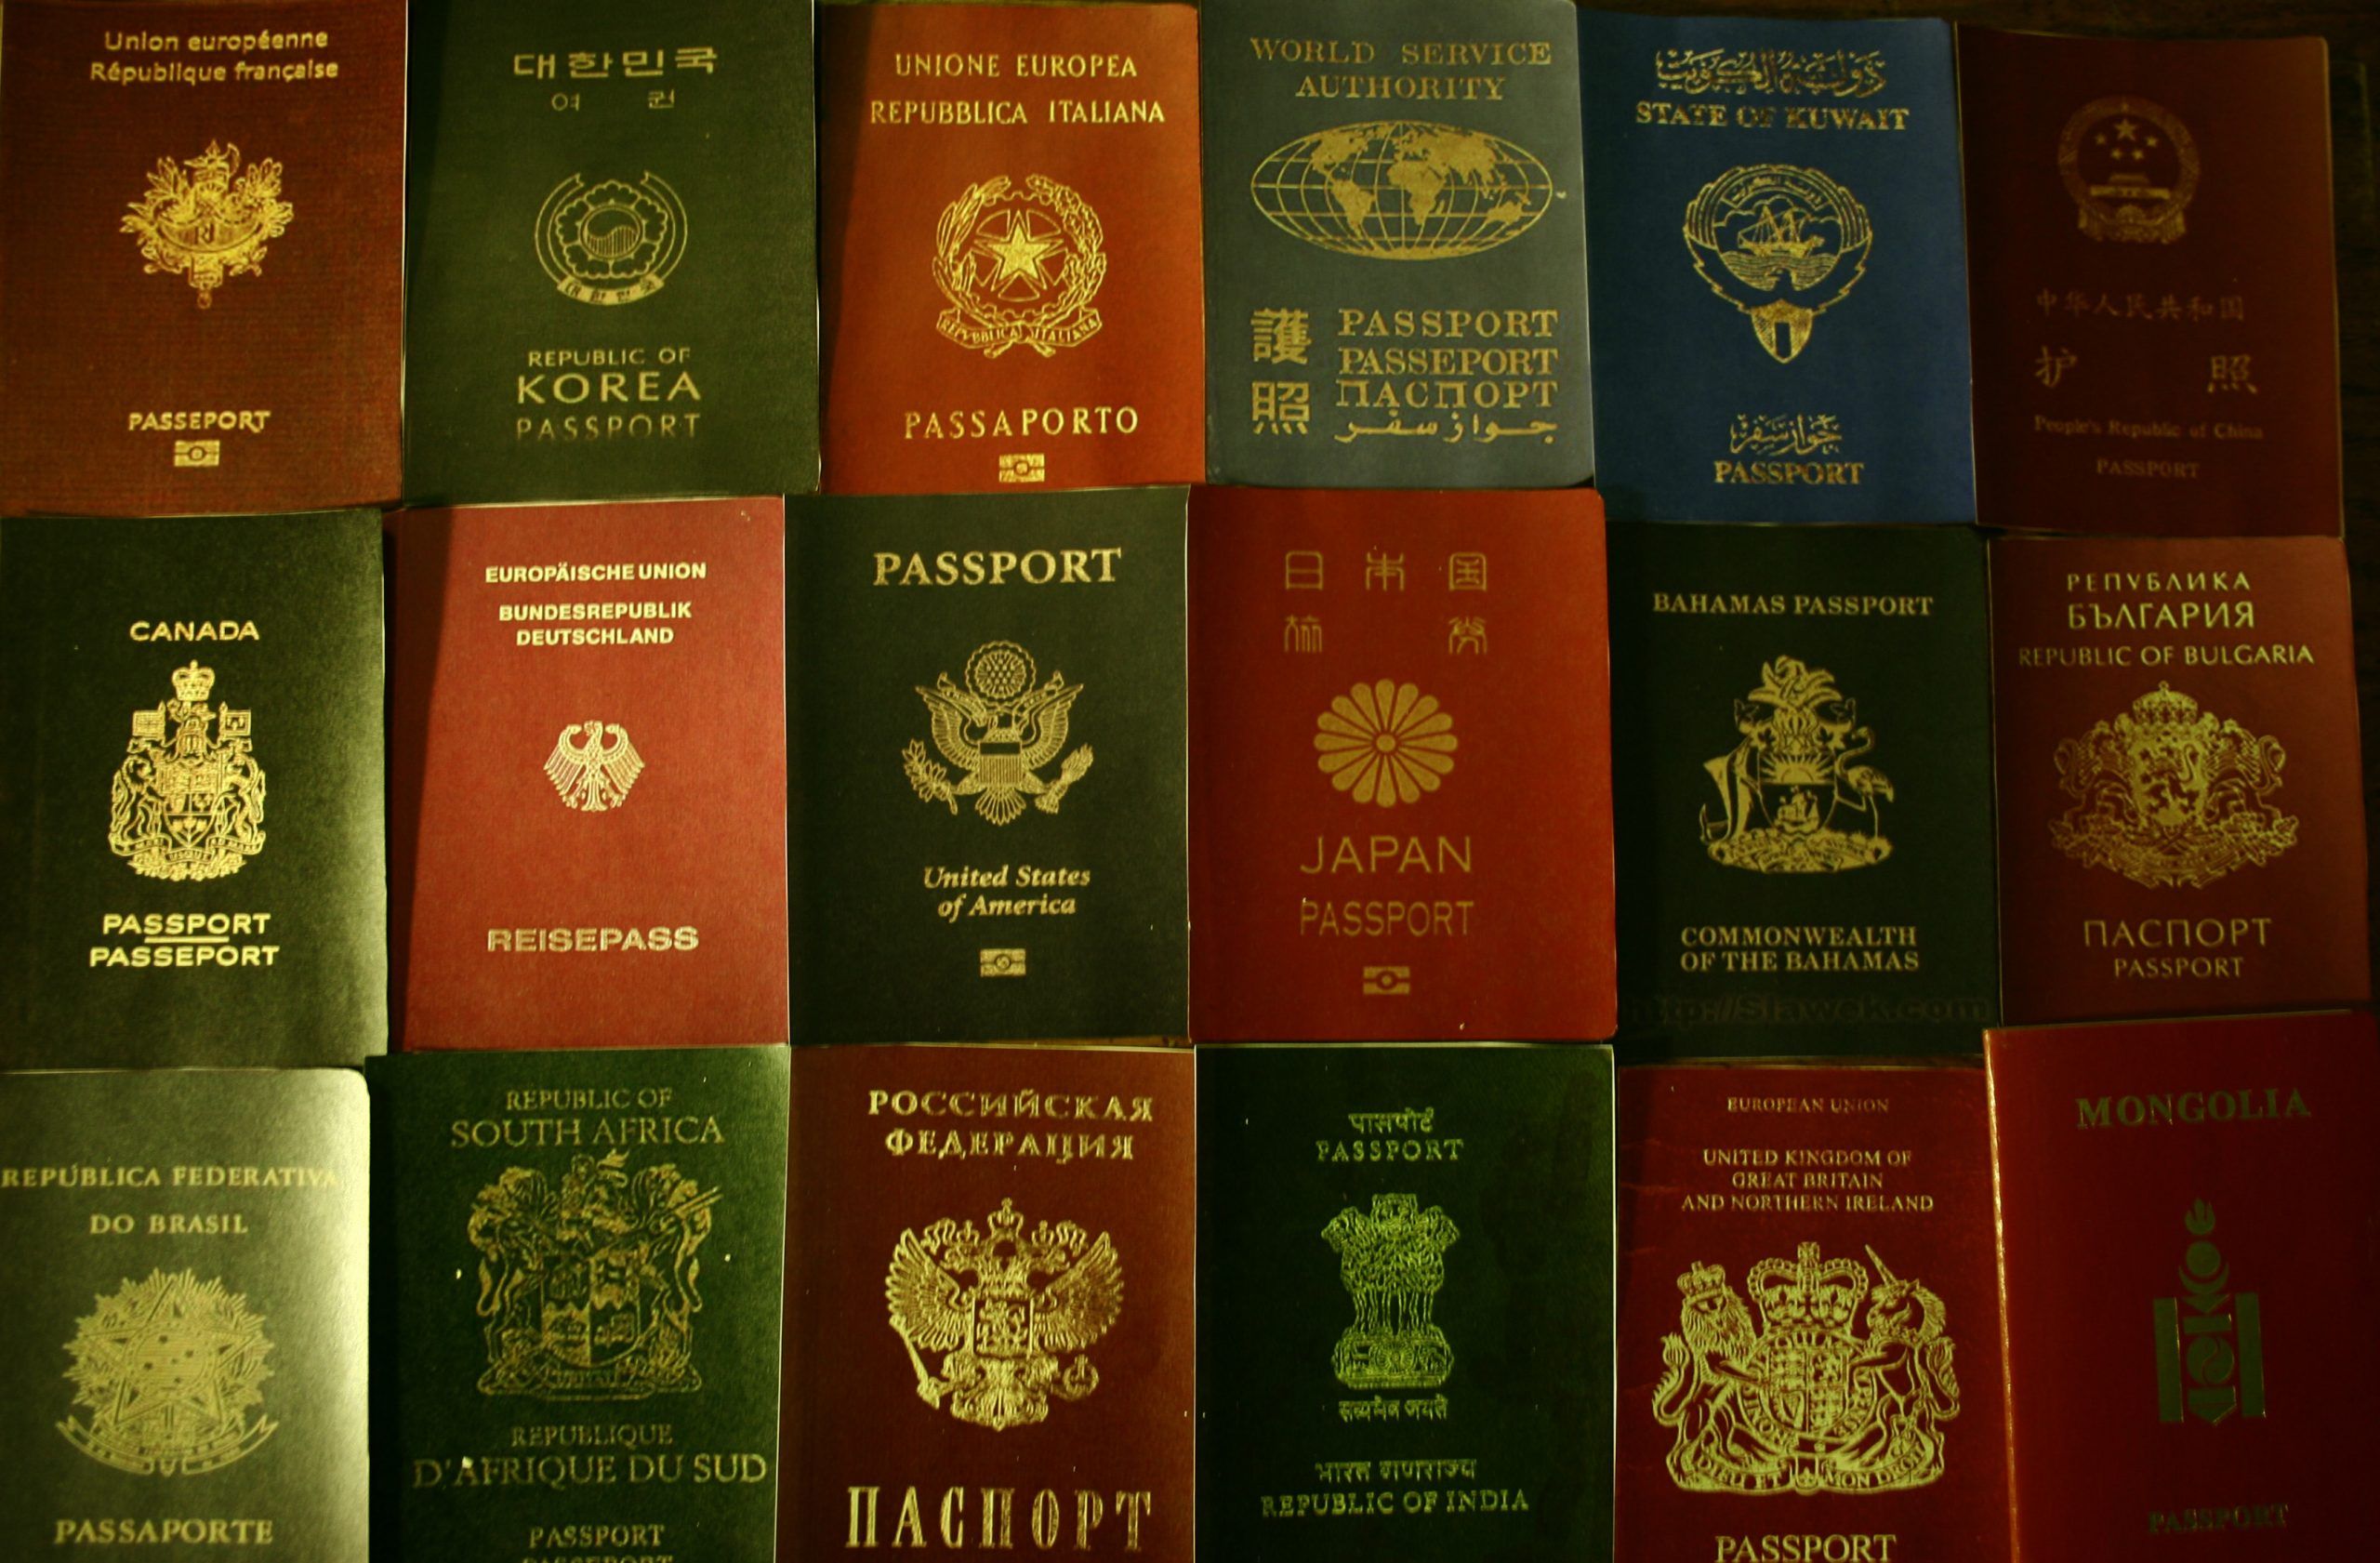 The latest Henley Passport Index shows a new Iron Curtain forming